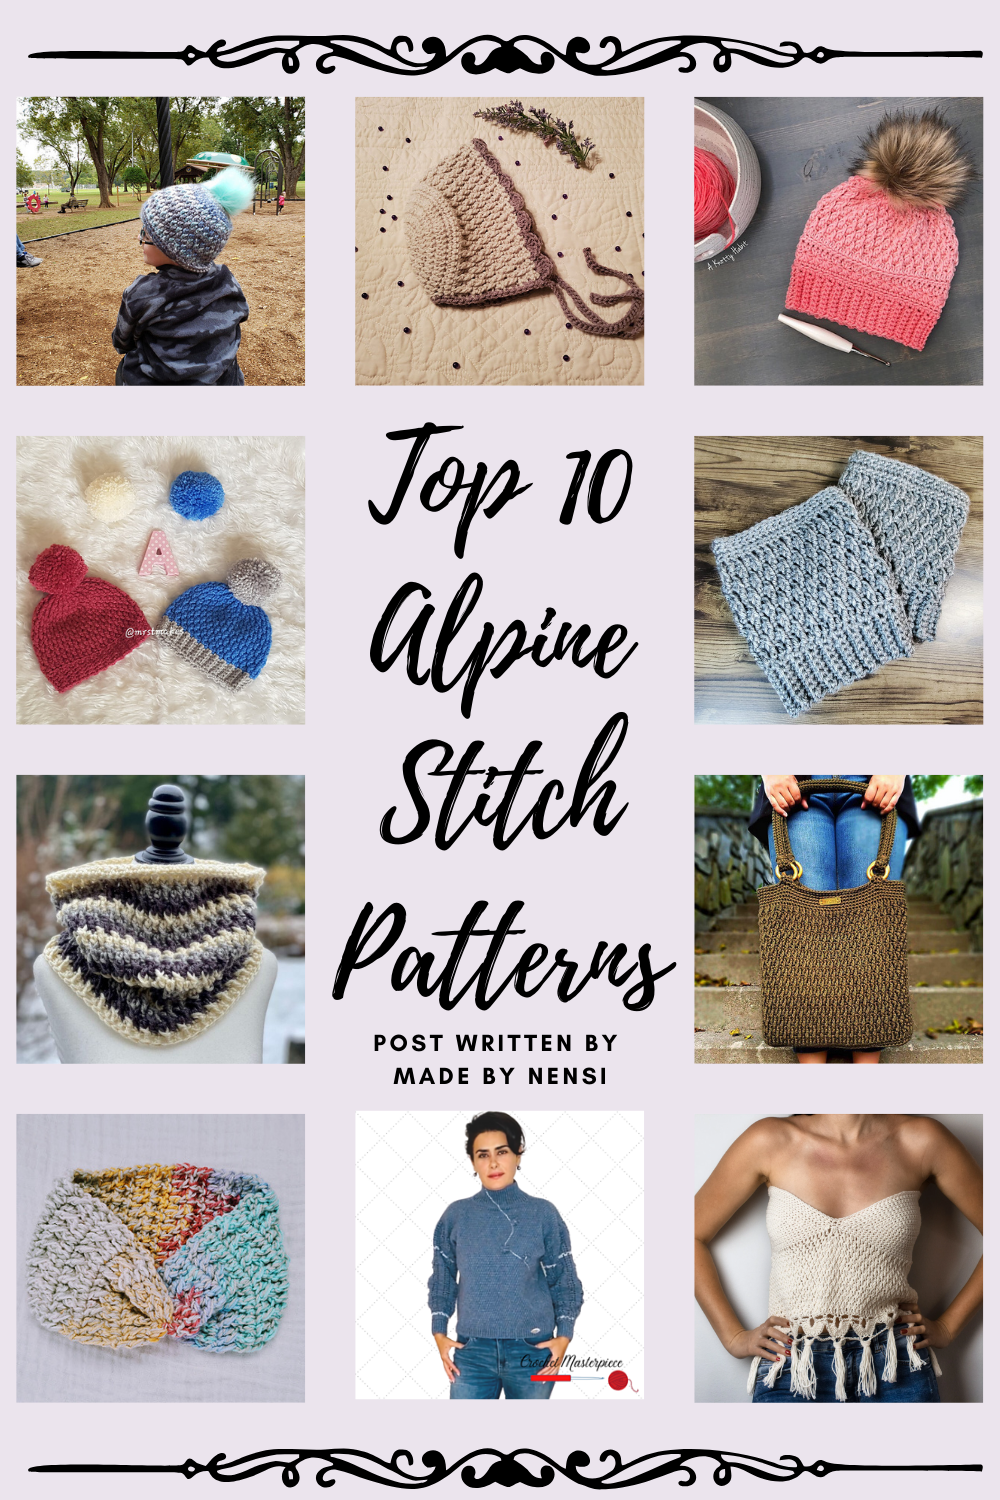 Top 10 Alpine Stitch Patterns by Made By Nensi.png